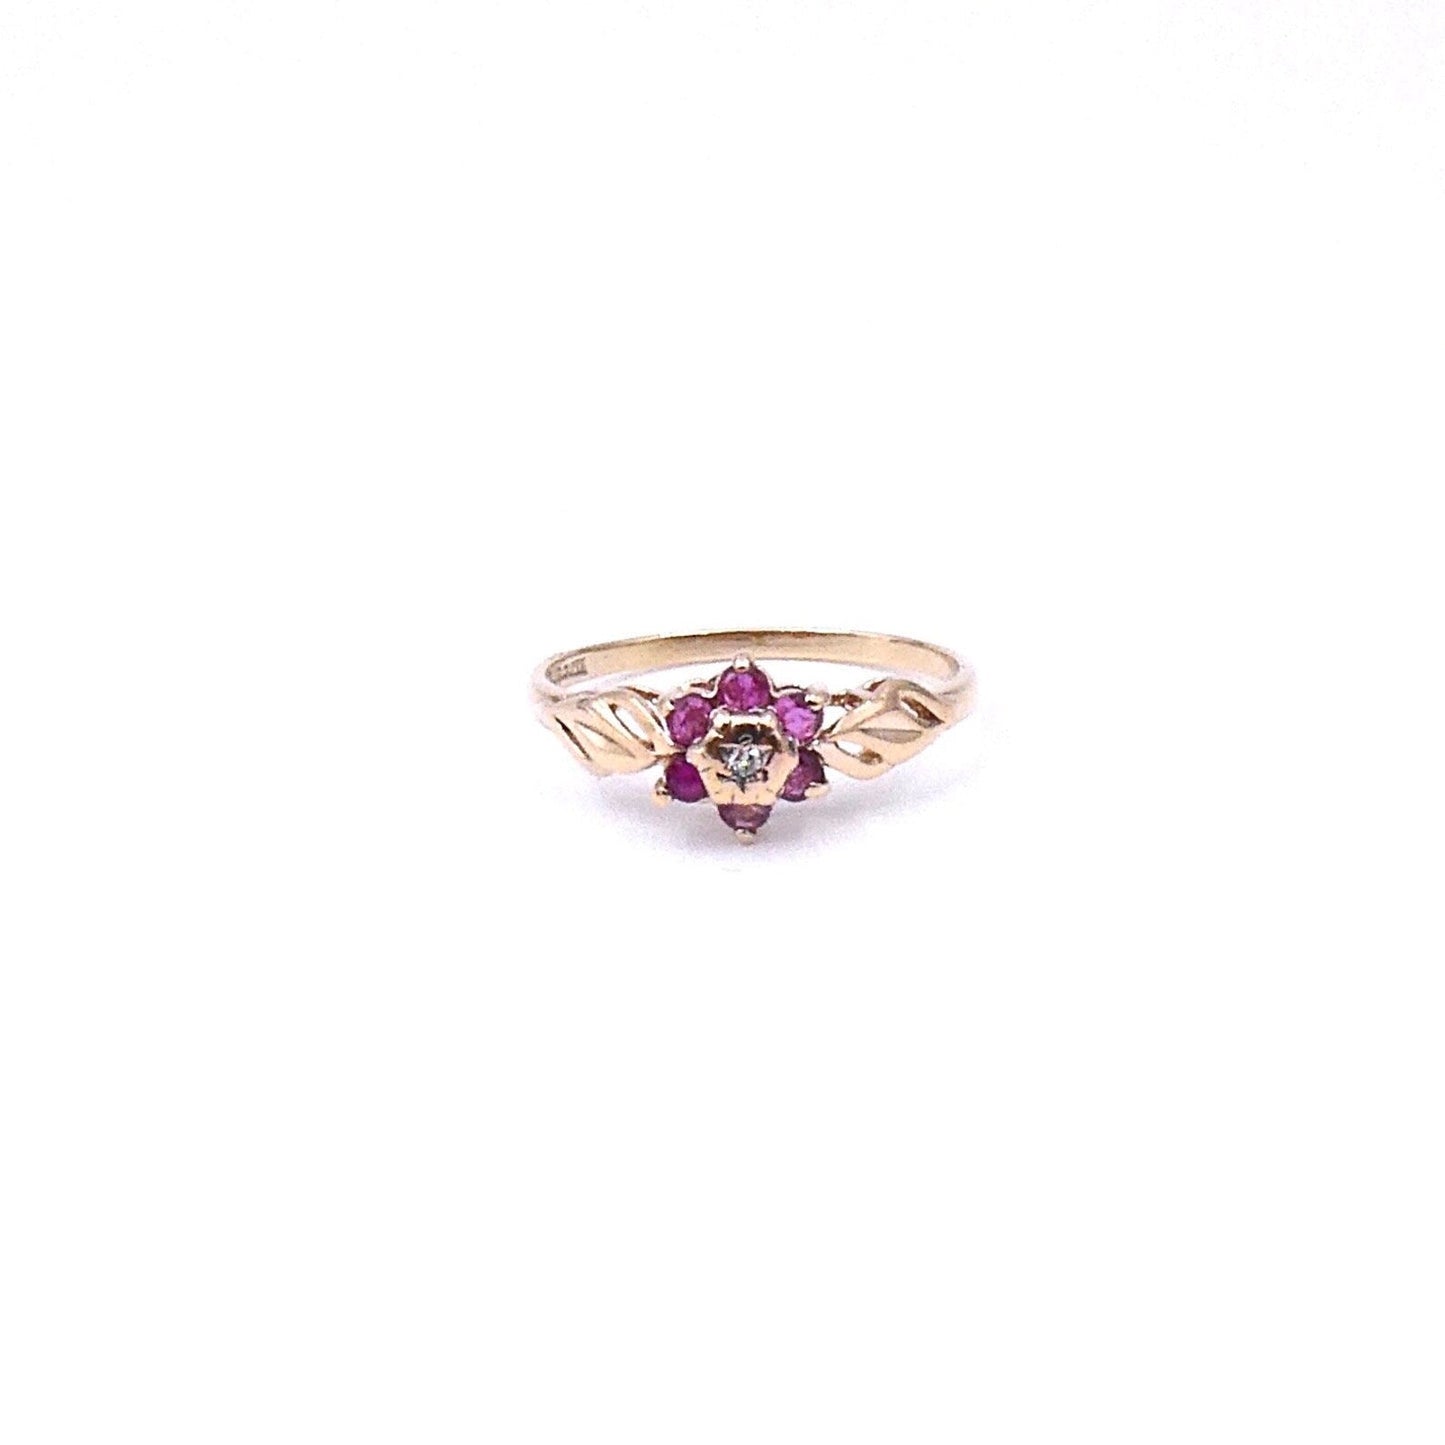 Vintage ruby diamond cluster flower ring, a delicate vintage ruby ring in 9kt gold. - Collected